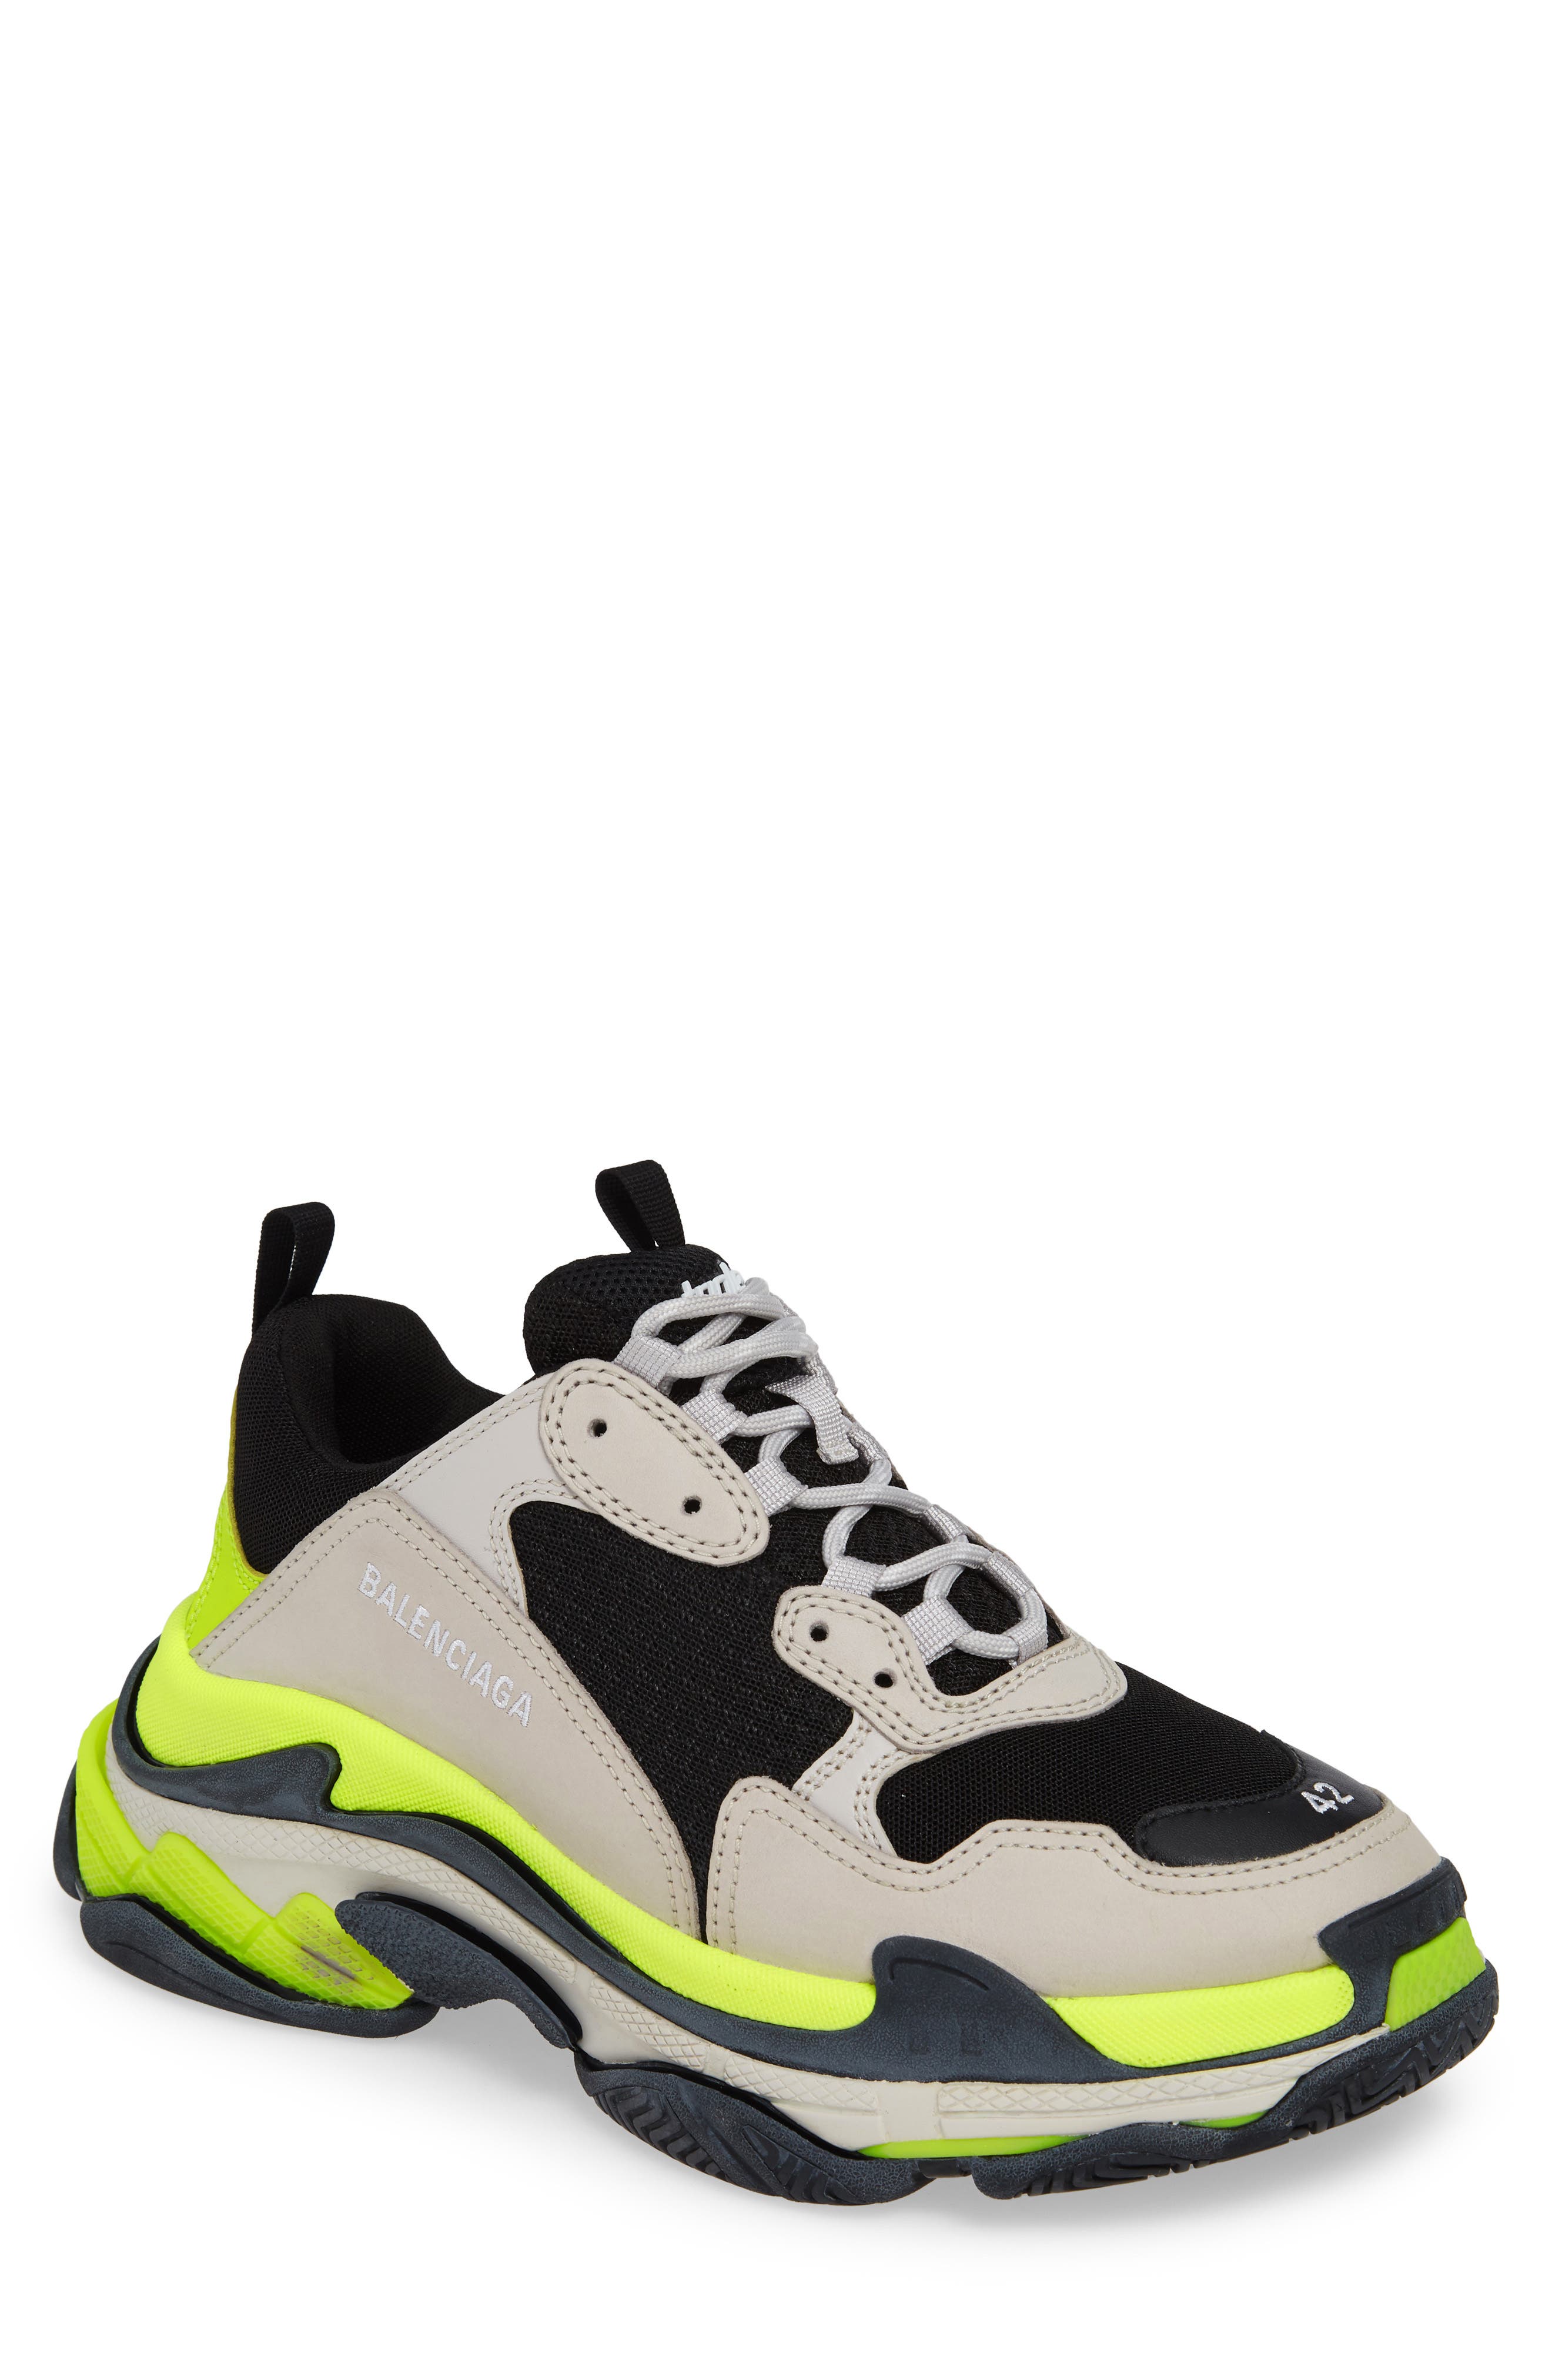 sneakers balenciaga triple s grey volt lil baby on his 48863bc